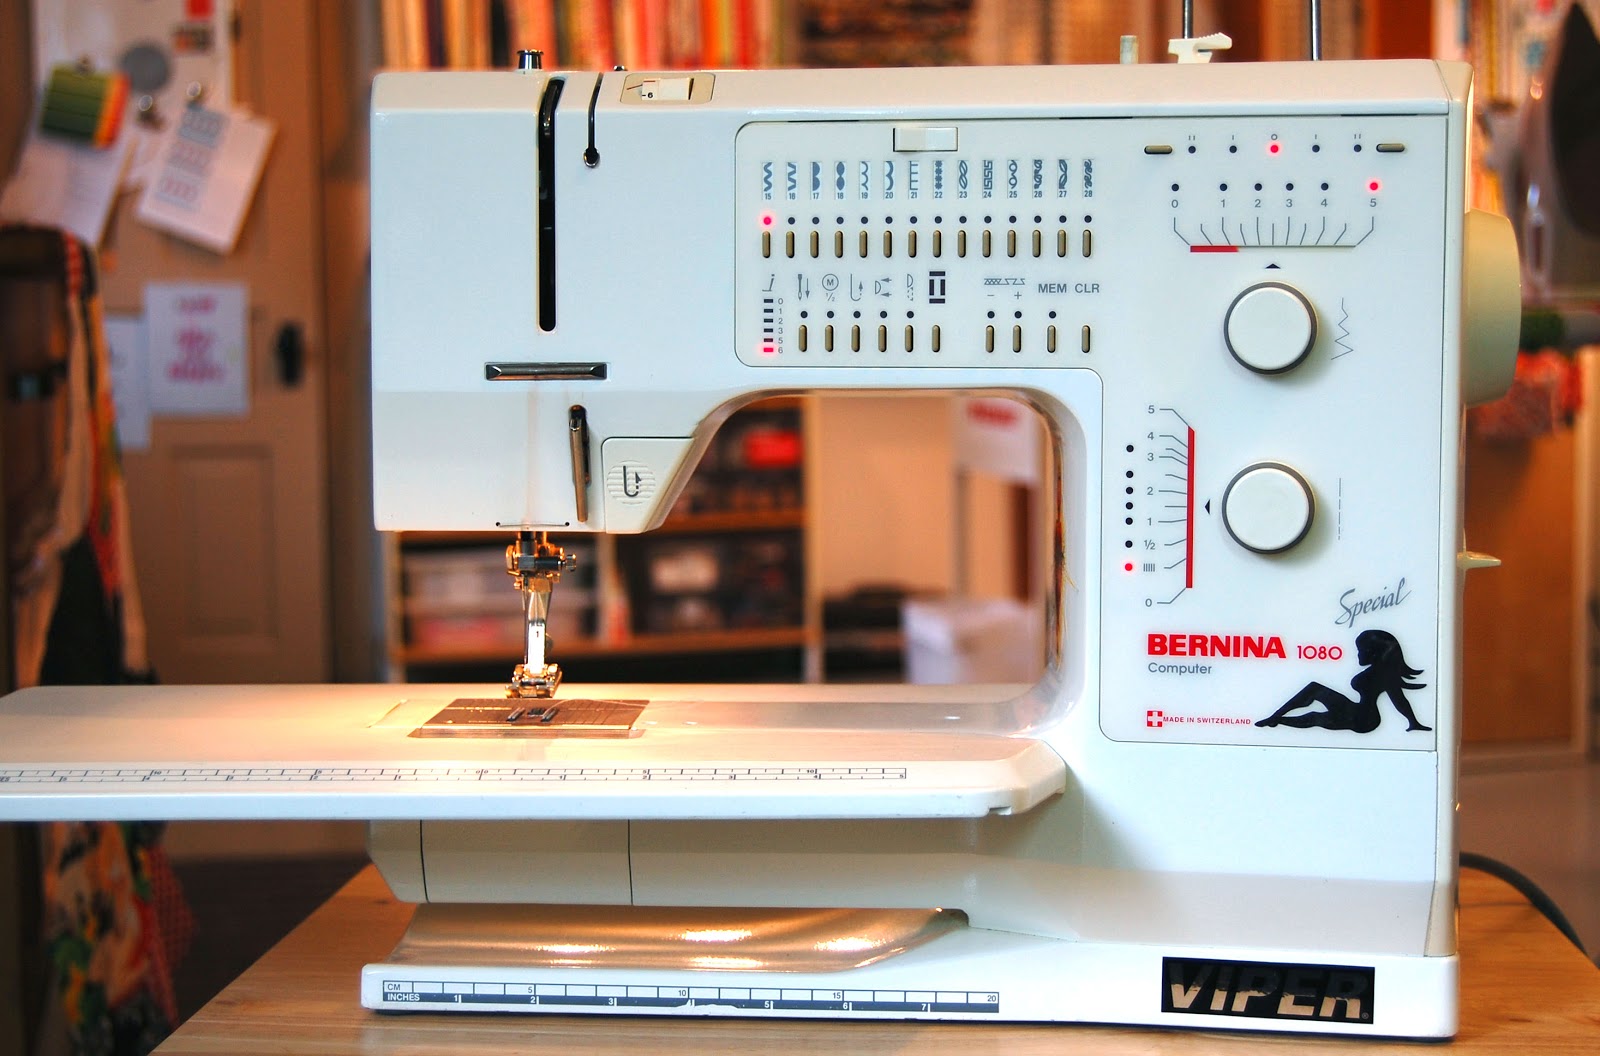 Bernette 720 Sewing Machine review by johnrktx